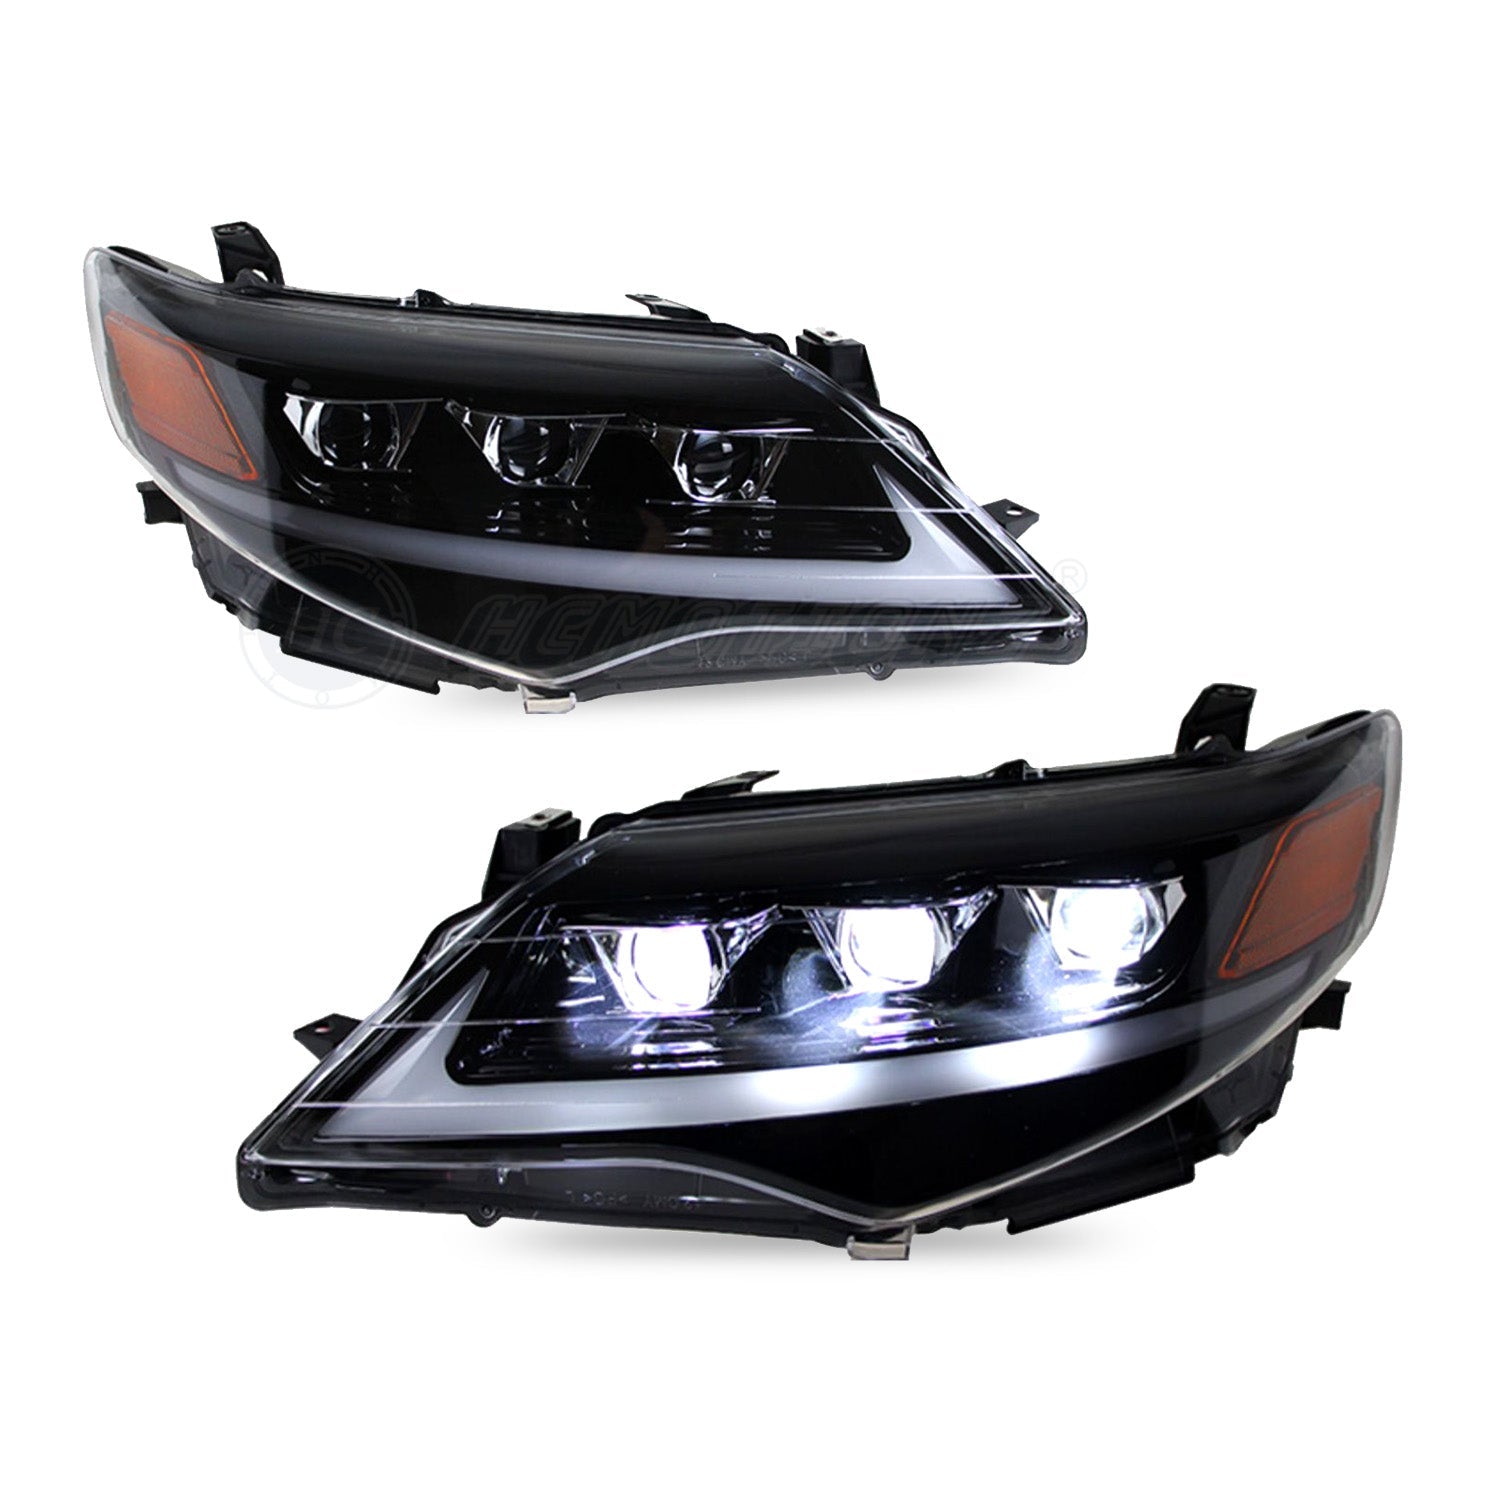 HCMOTION LED Headlights For Toyota Camry 2012-2014 - HCMOTION